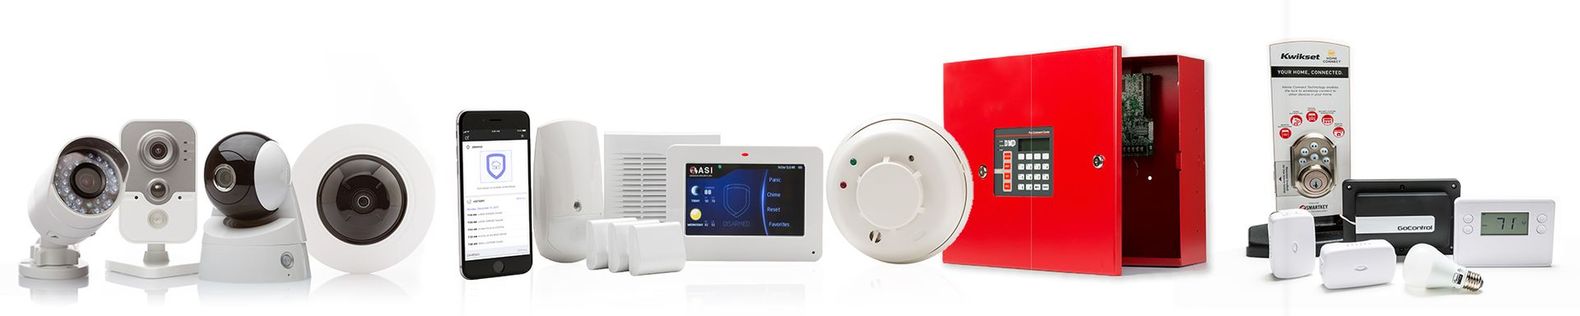 Photo of home or Office security system fire alarm and locks